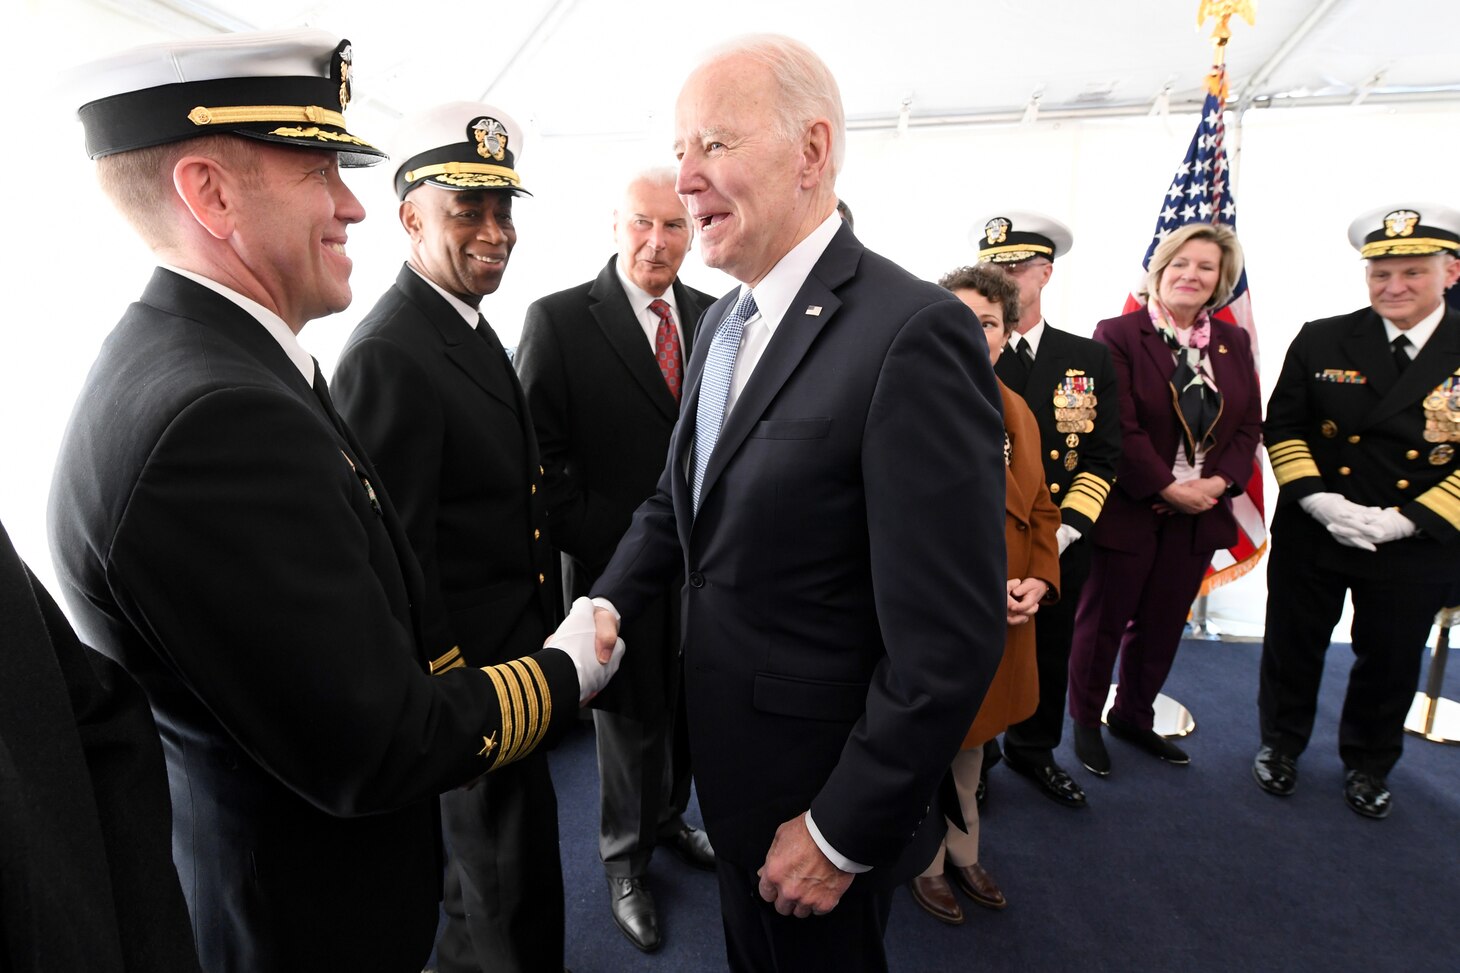 President of the United States Joe Biden is greeted by Submarine Squadron 12 commander Capt. Matthew Boland during a commissioning commemoration ceremony for the Virginia-class submarine USS Delaware (SSN 791) in Wilmington, Delaware April 2, 2022.